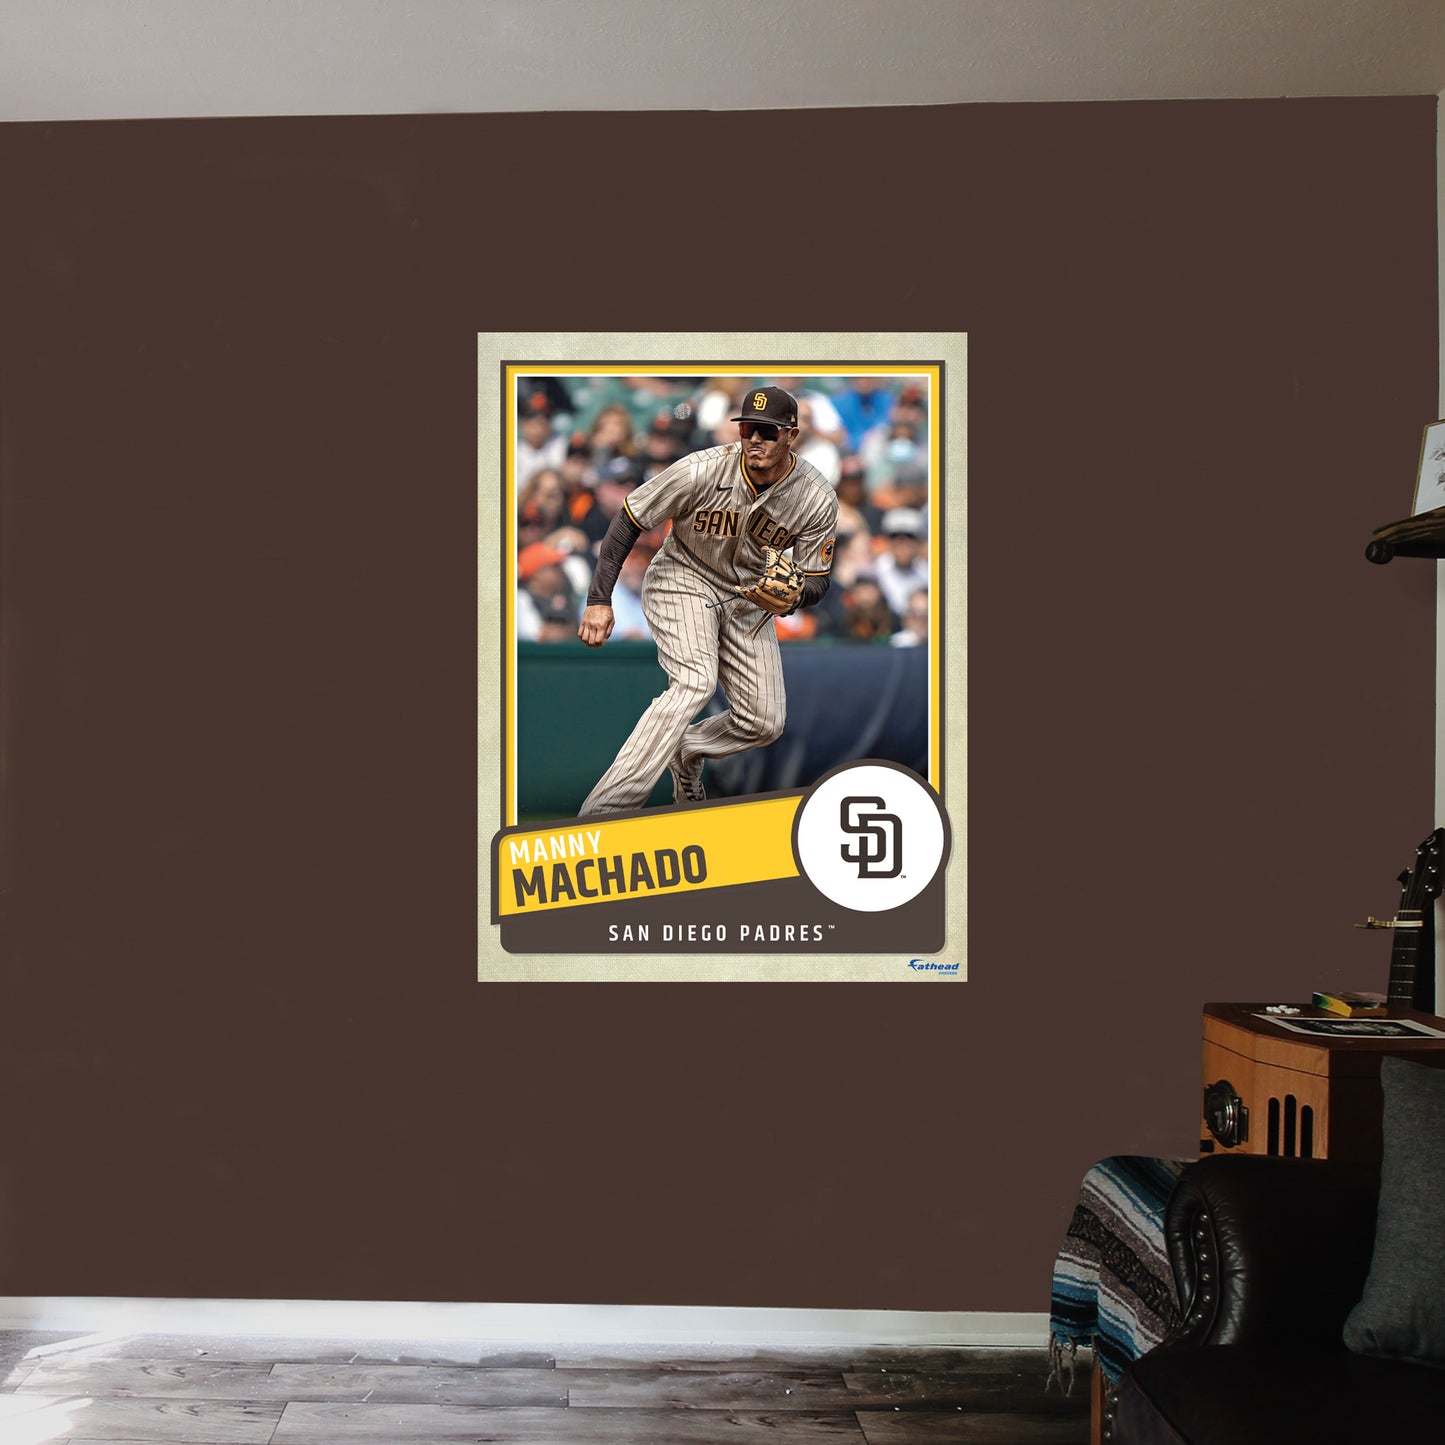 San Diego Padres: Manny Machado  Poster        - Officially Licensed MLB Removable     Adhesive Decal